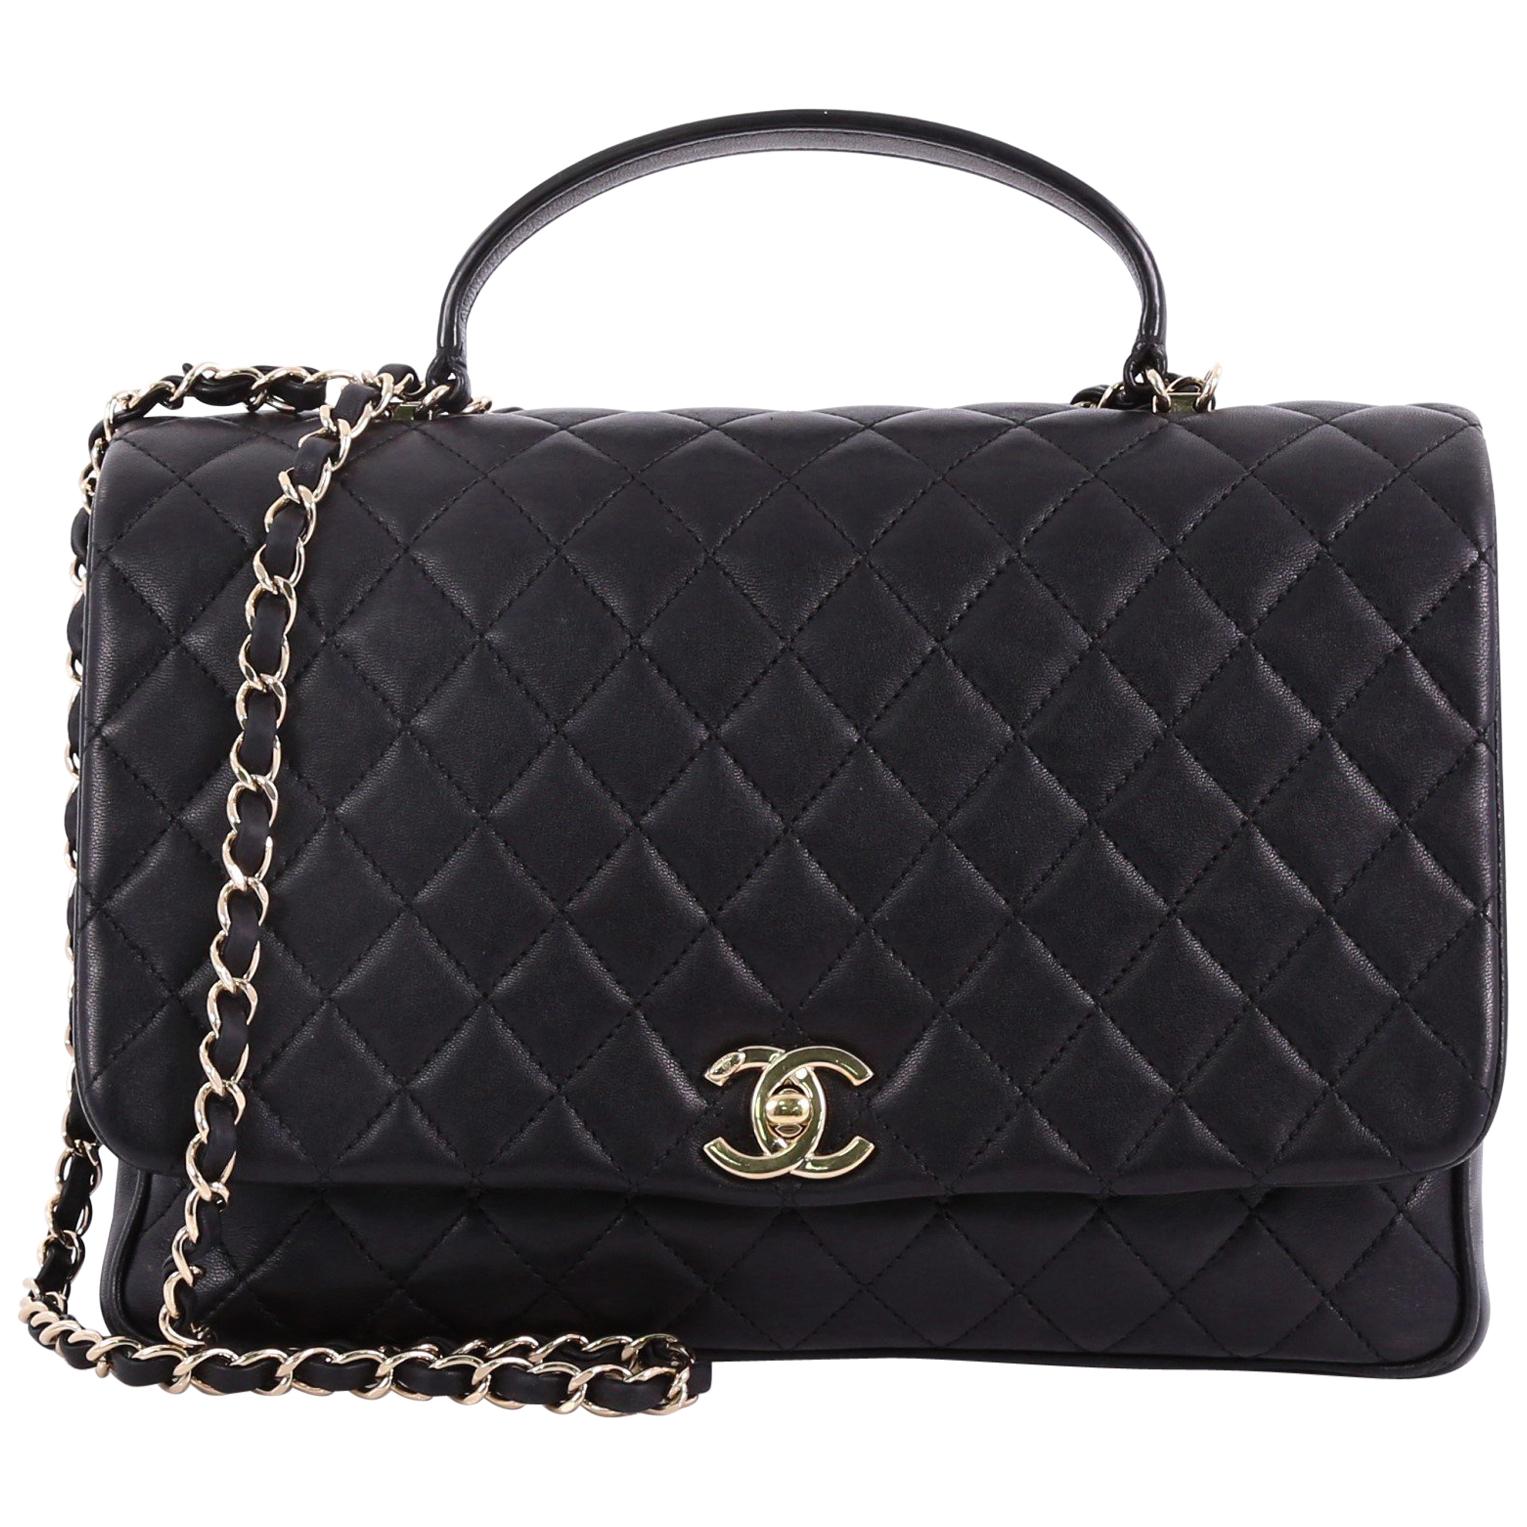 CHANEL, Bags, Sold Chanel Citizen Chic Flap Bag